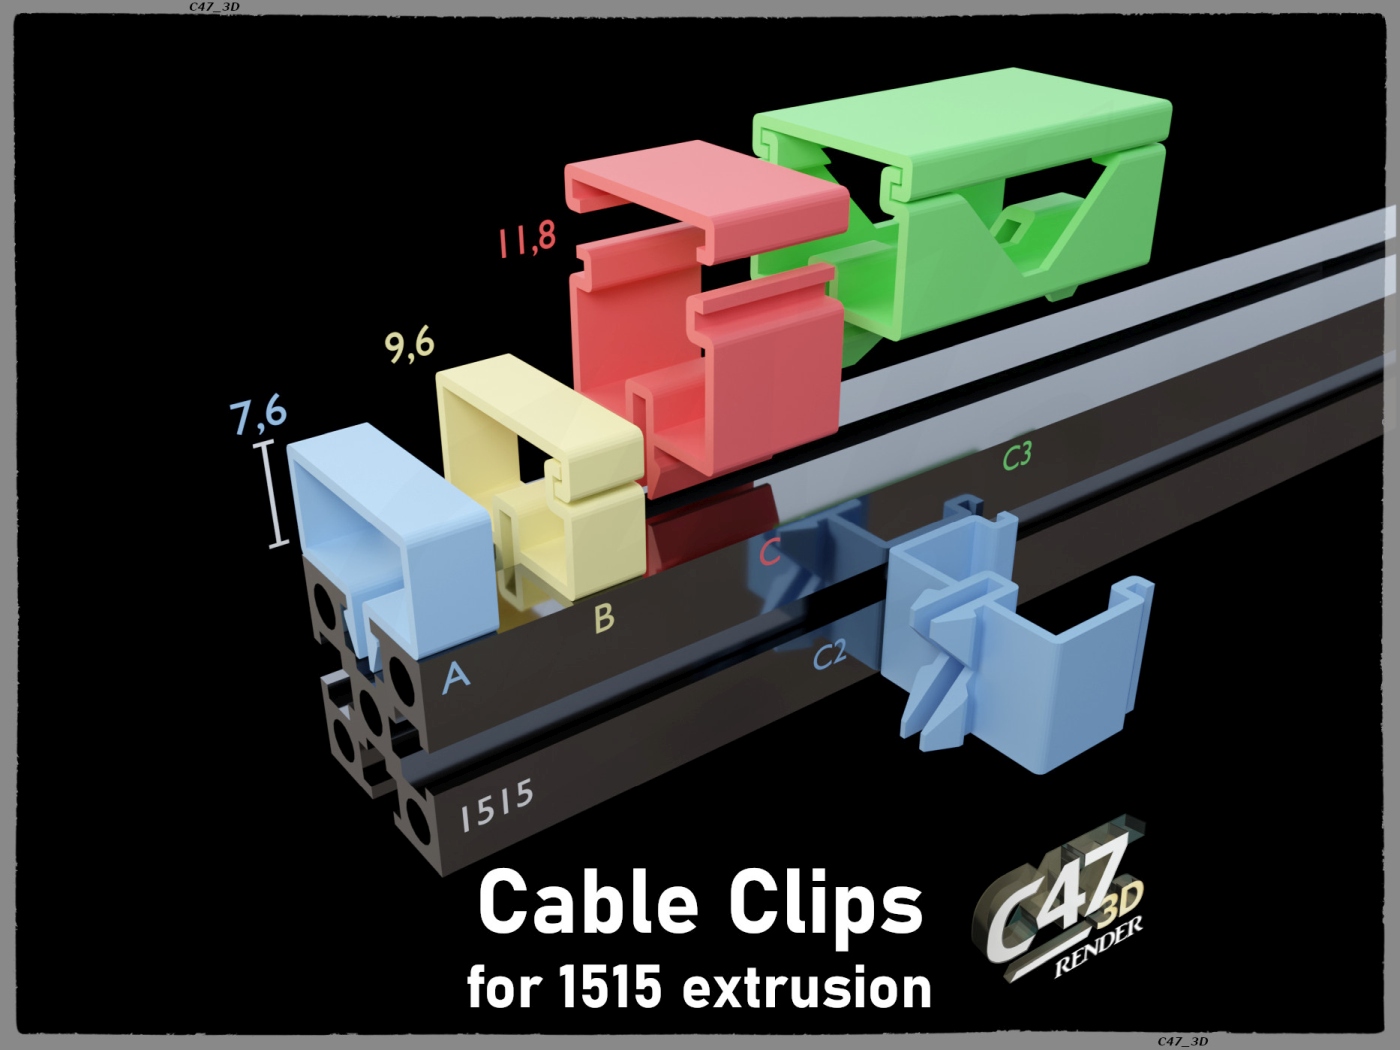 Cable Clips for 1515 extrusion